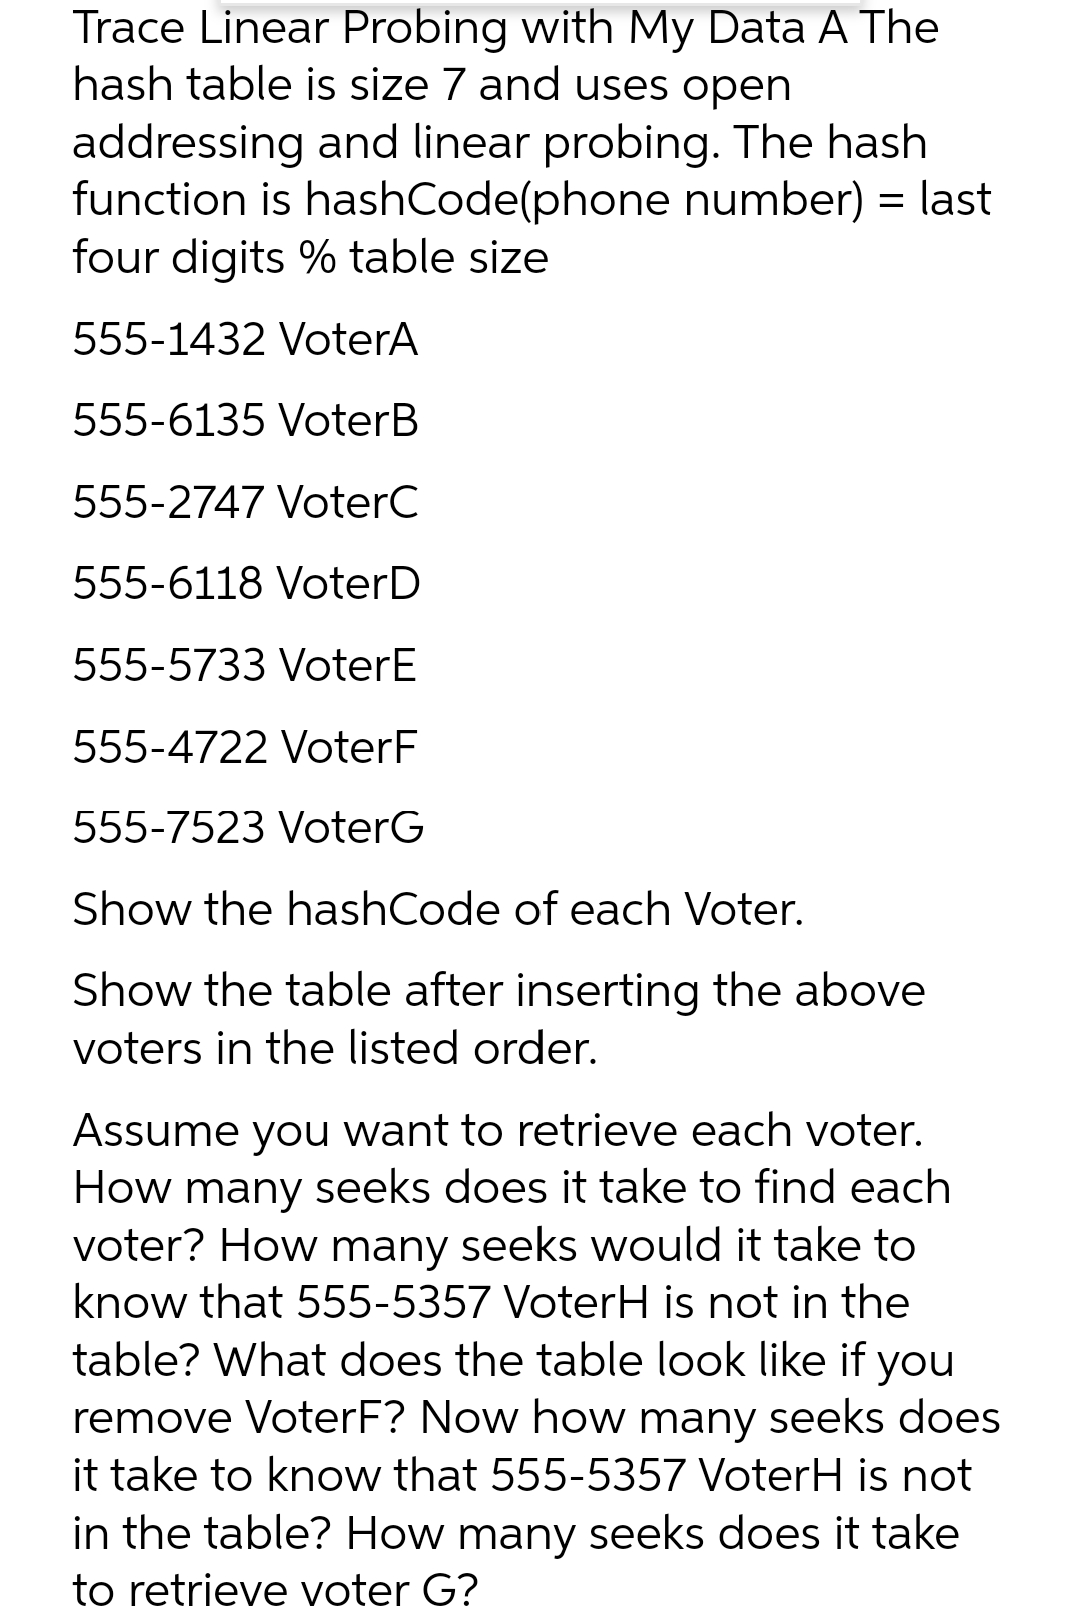 Trace Linear Probing with My Data A The
hash table is size 7 and uses open
addressing and linear probing. The hash
function is hashCode(phone number) = last
four digits % table size
555-1432 VoterA
555-6135 VoterB
555-2747 VoterC
555-6118 VoterD
555-5733 VoterE
555-4722 VoterF
555-7523 VoterG
Show the hashCode of each Voter.
Show the table after inserting the above
voters in the listed order.
Assume you want to retrieve each voter.
How many seeks does it take to find each
voter? How many seeks would it take to
know that 555-5357 VoterH is not in the
table? What does the table look like if you
remove VoterF? Now how many seeks does
it take to know that 555-5357 VoterH is not
in the table? How many seeks does it take
to retrieve voter G?